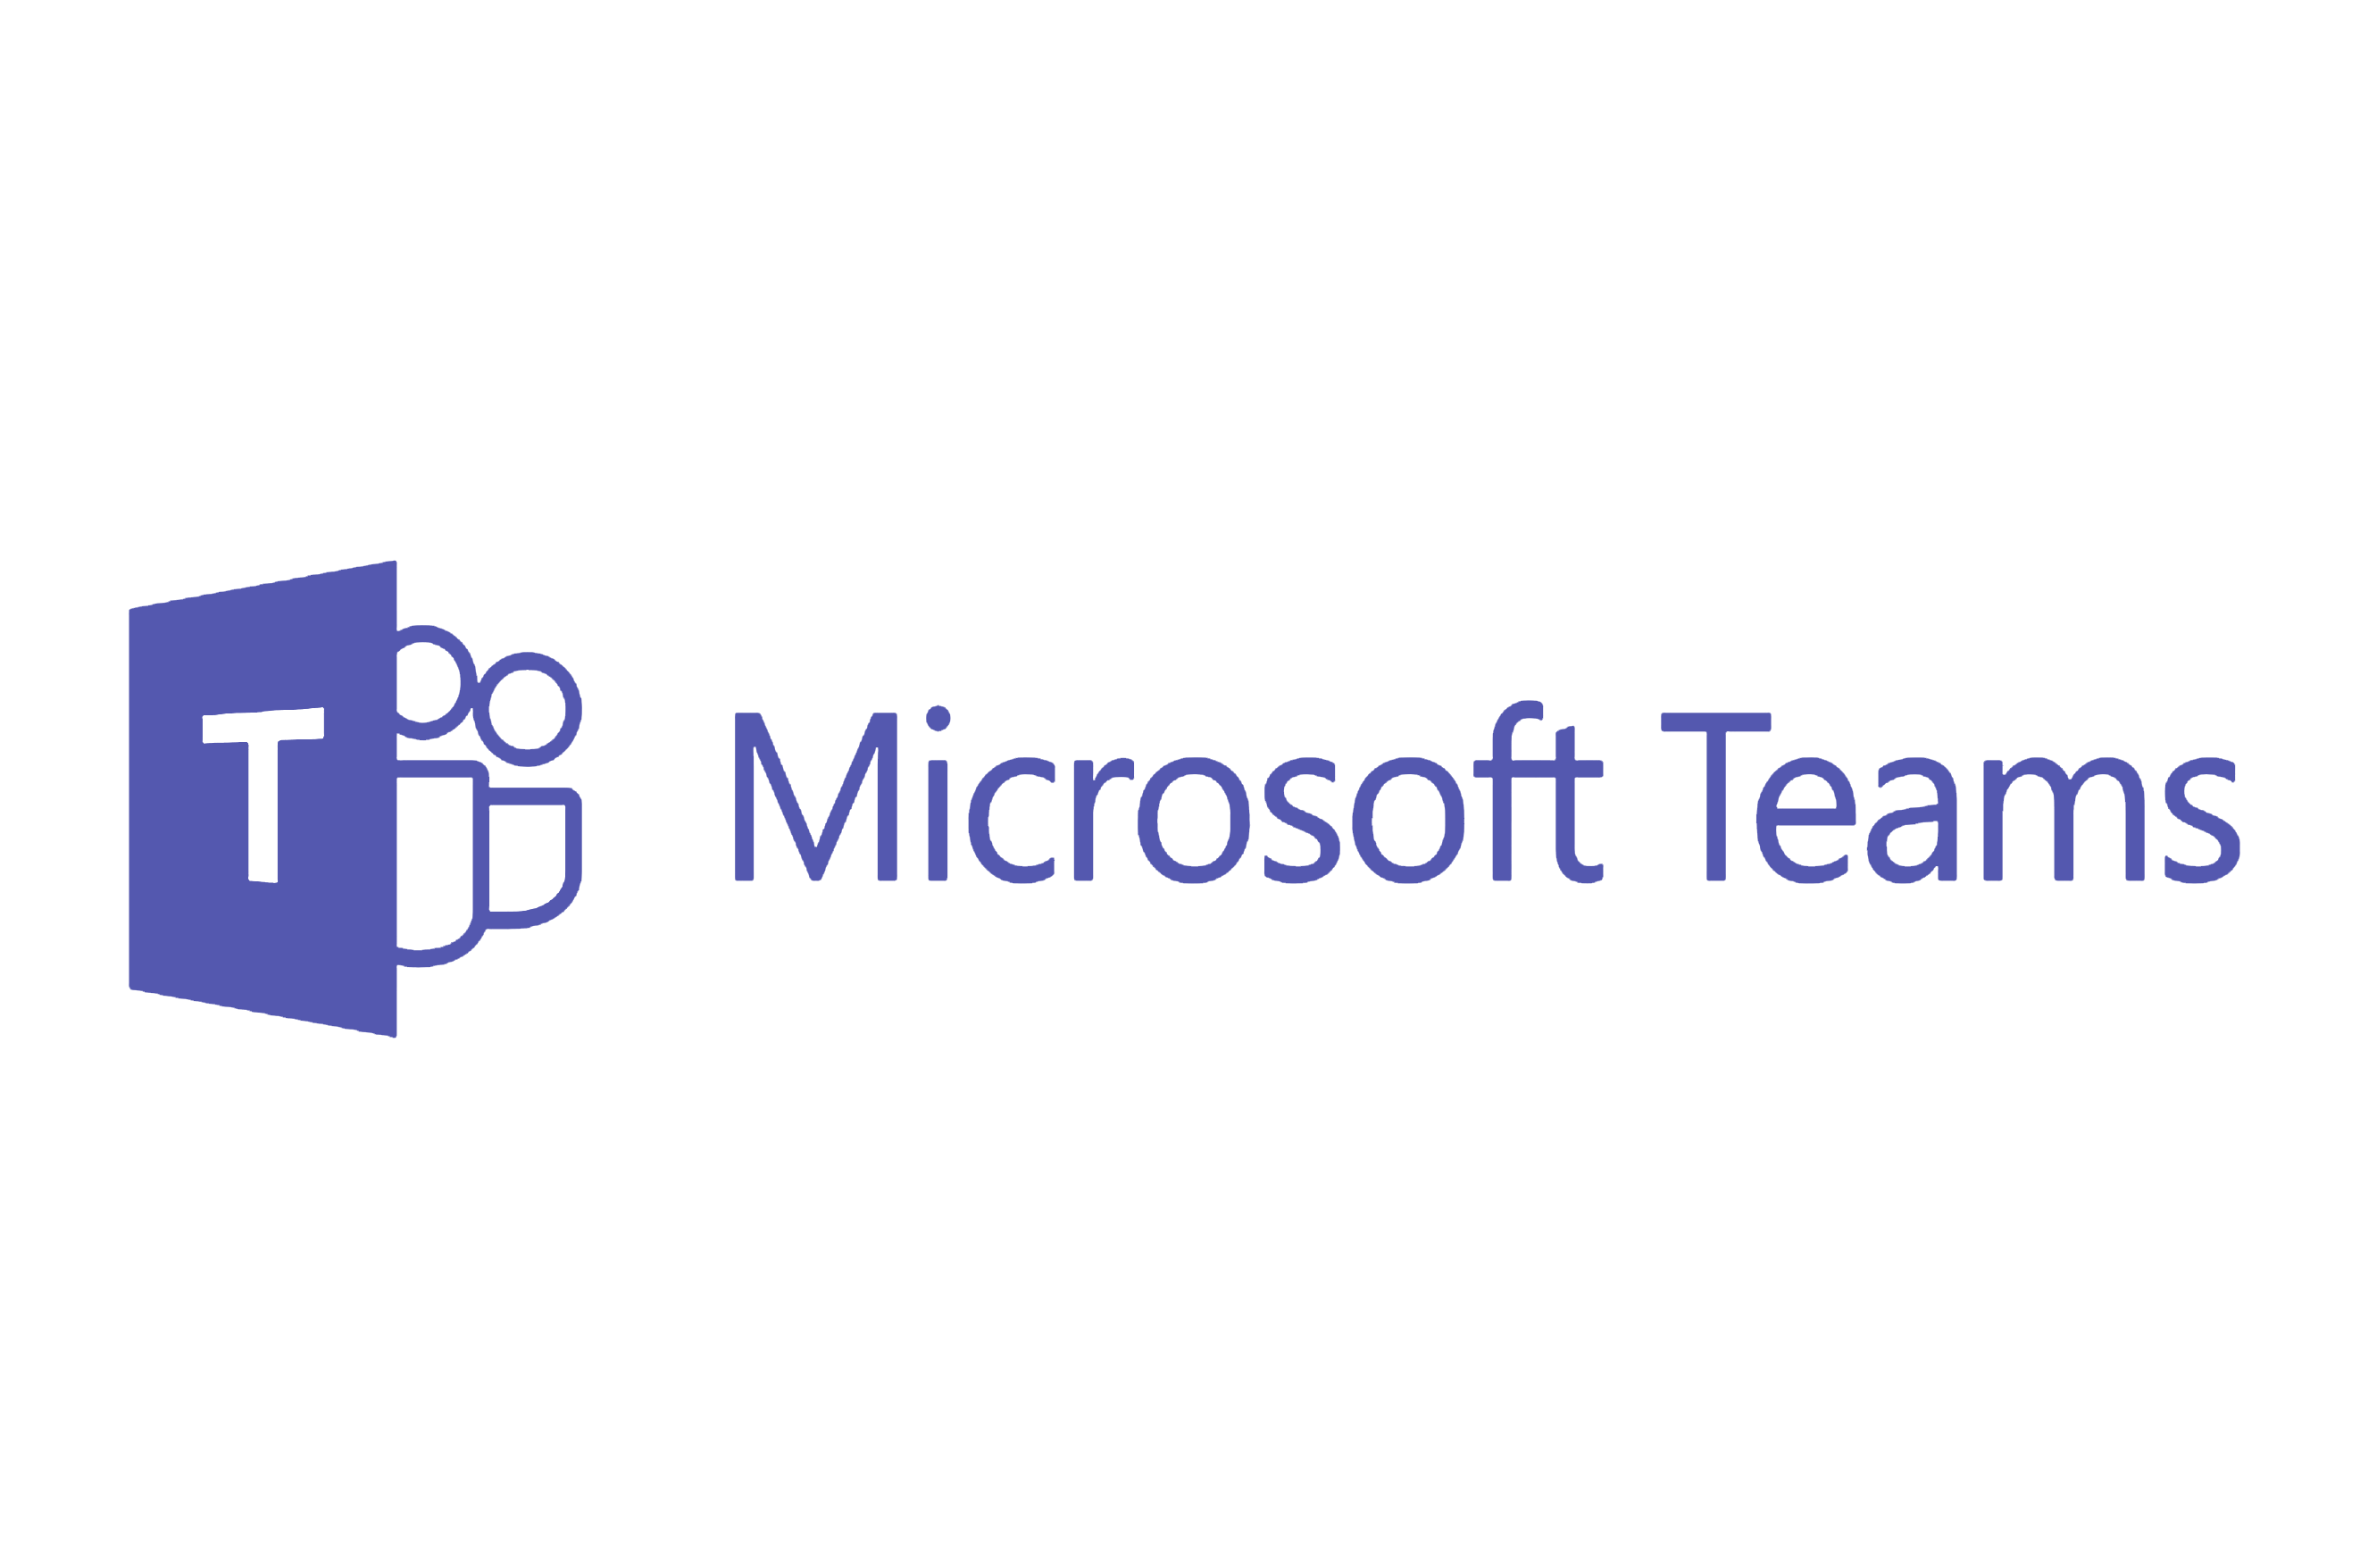 Microsoft works on introducing games to its Microsoft Teams service